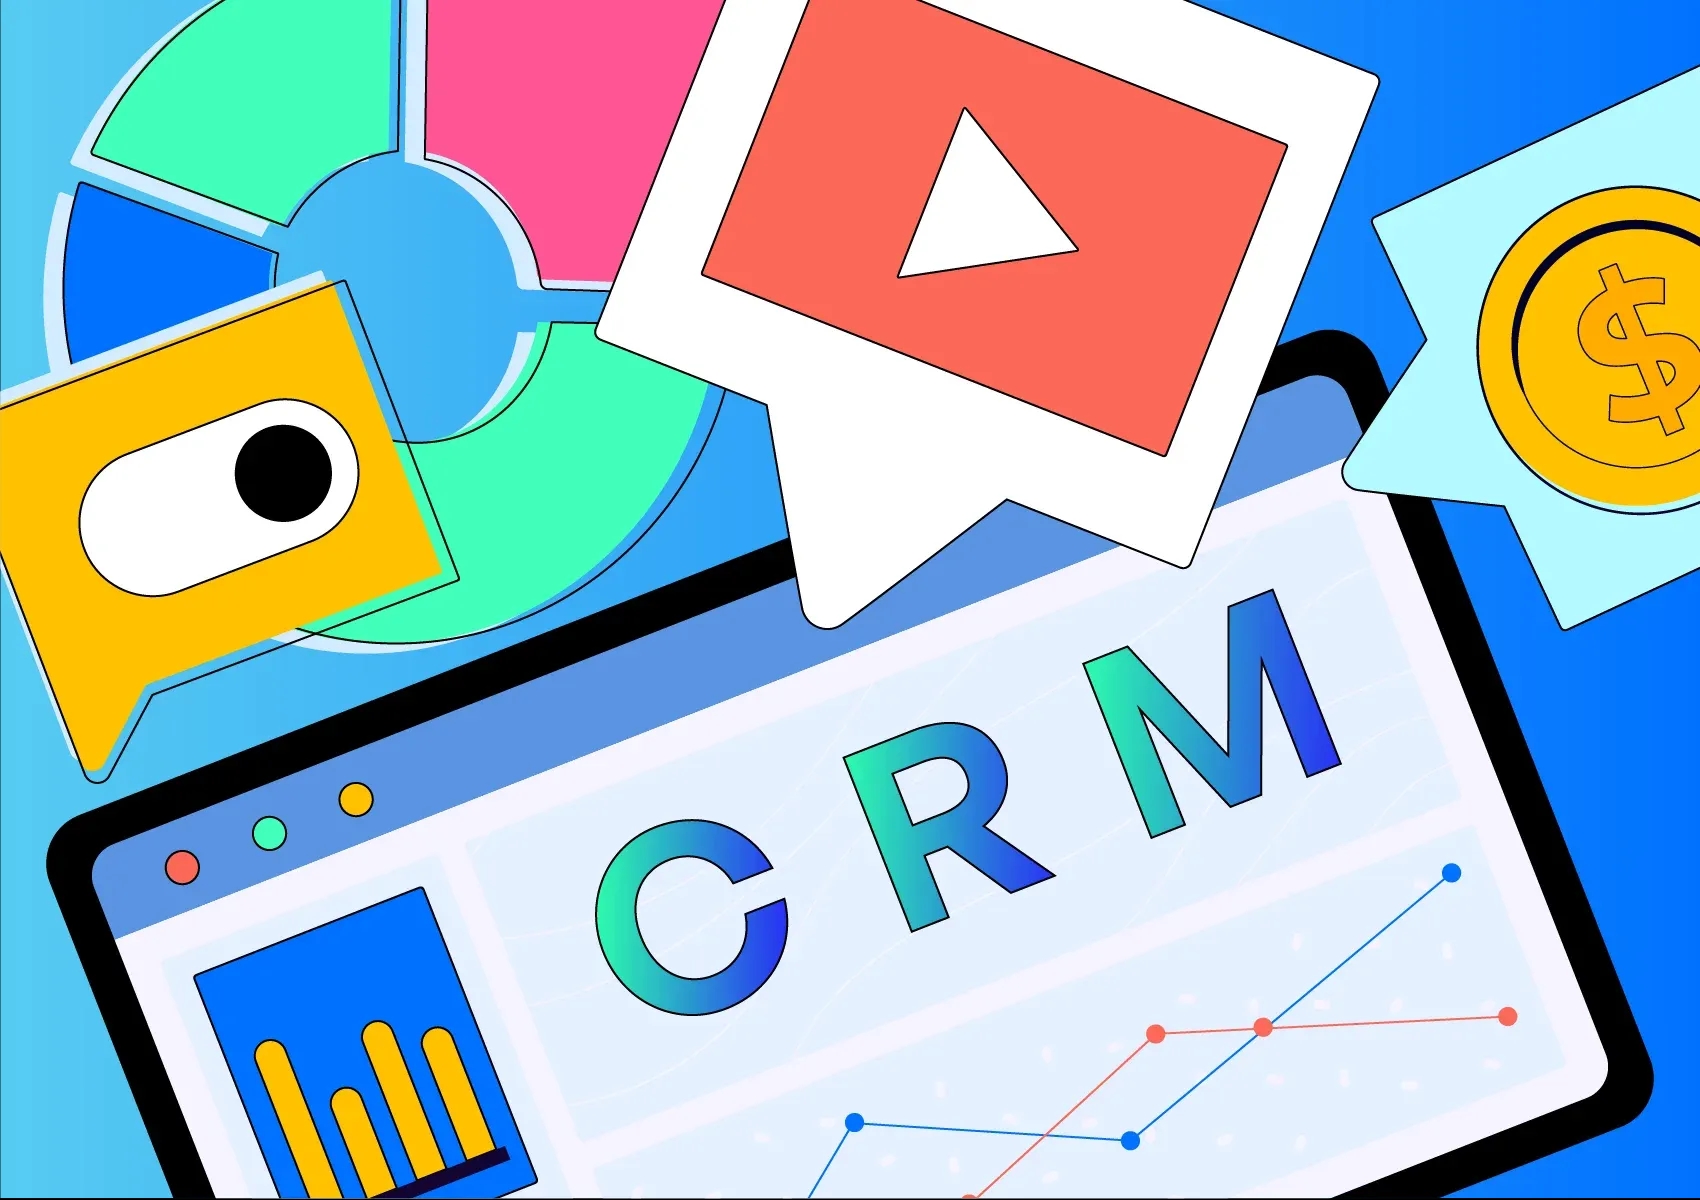 build your own crm system